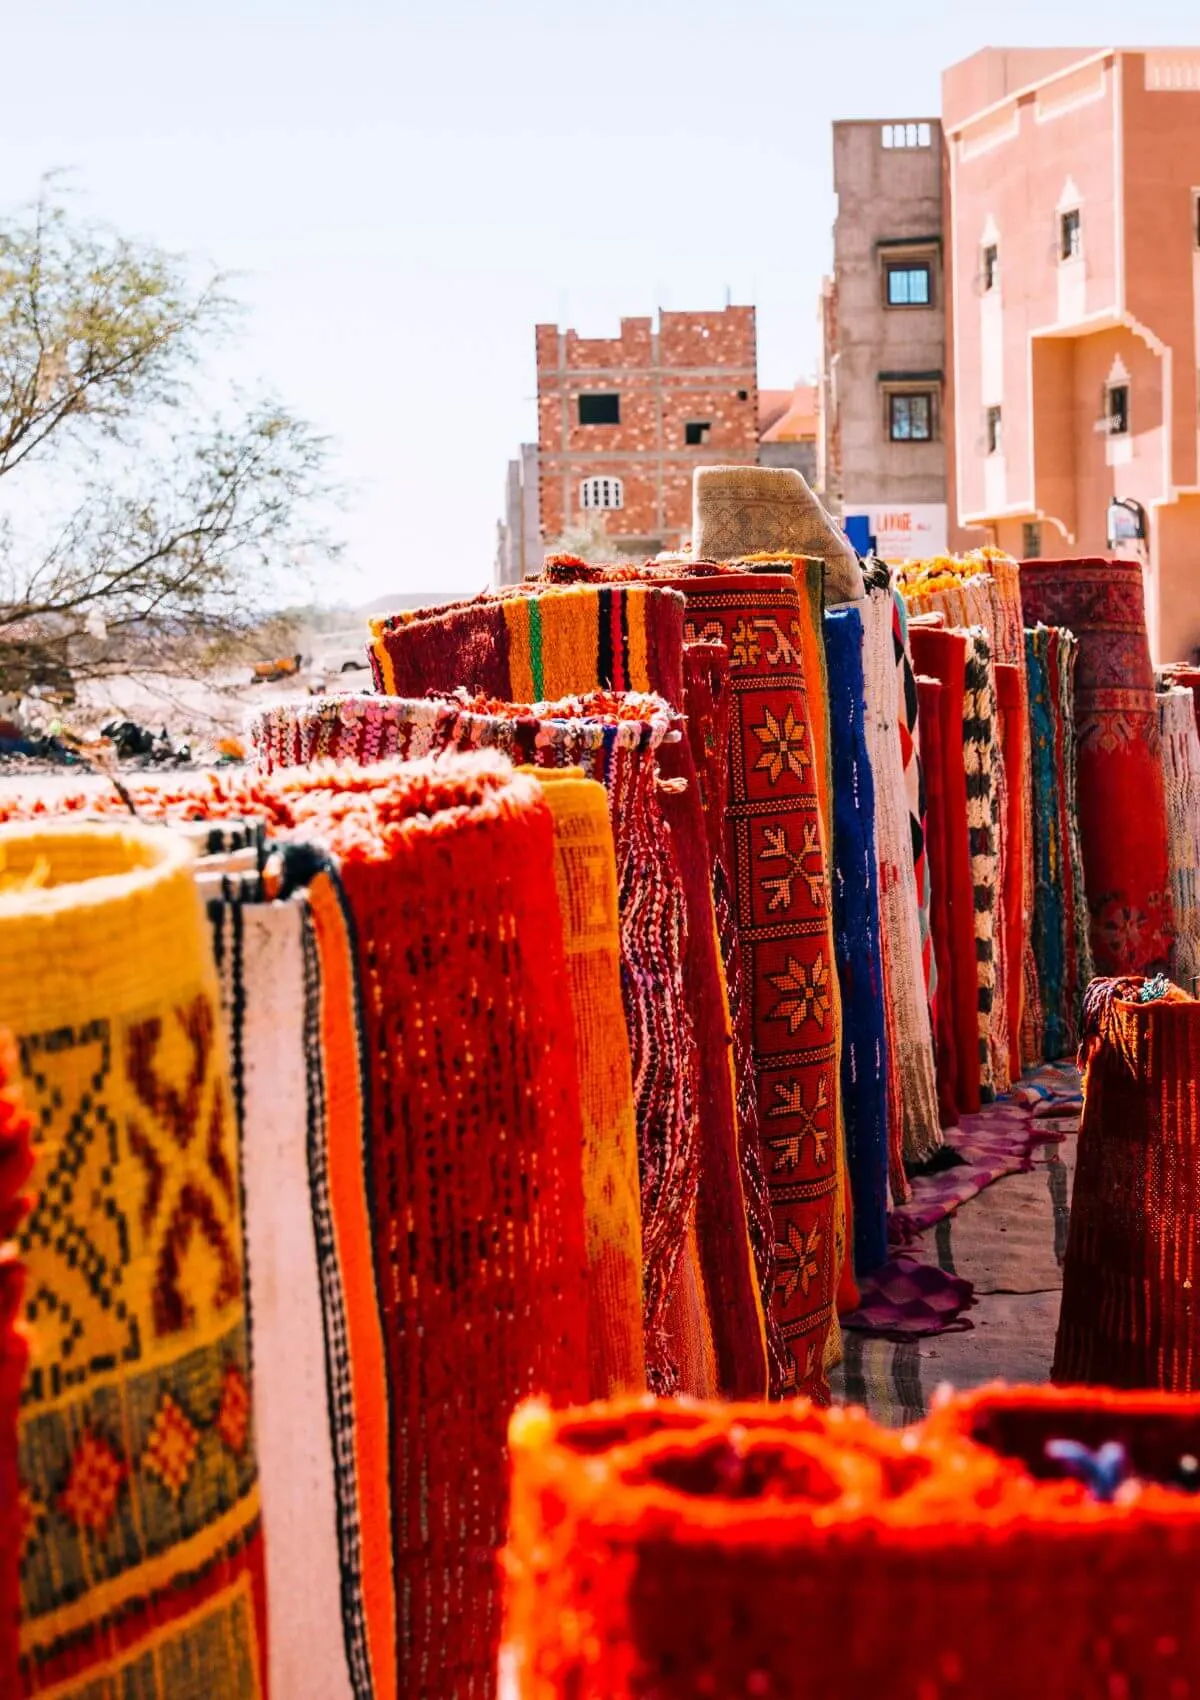 Rugs and carpets from Morocco